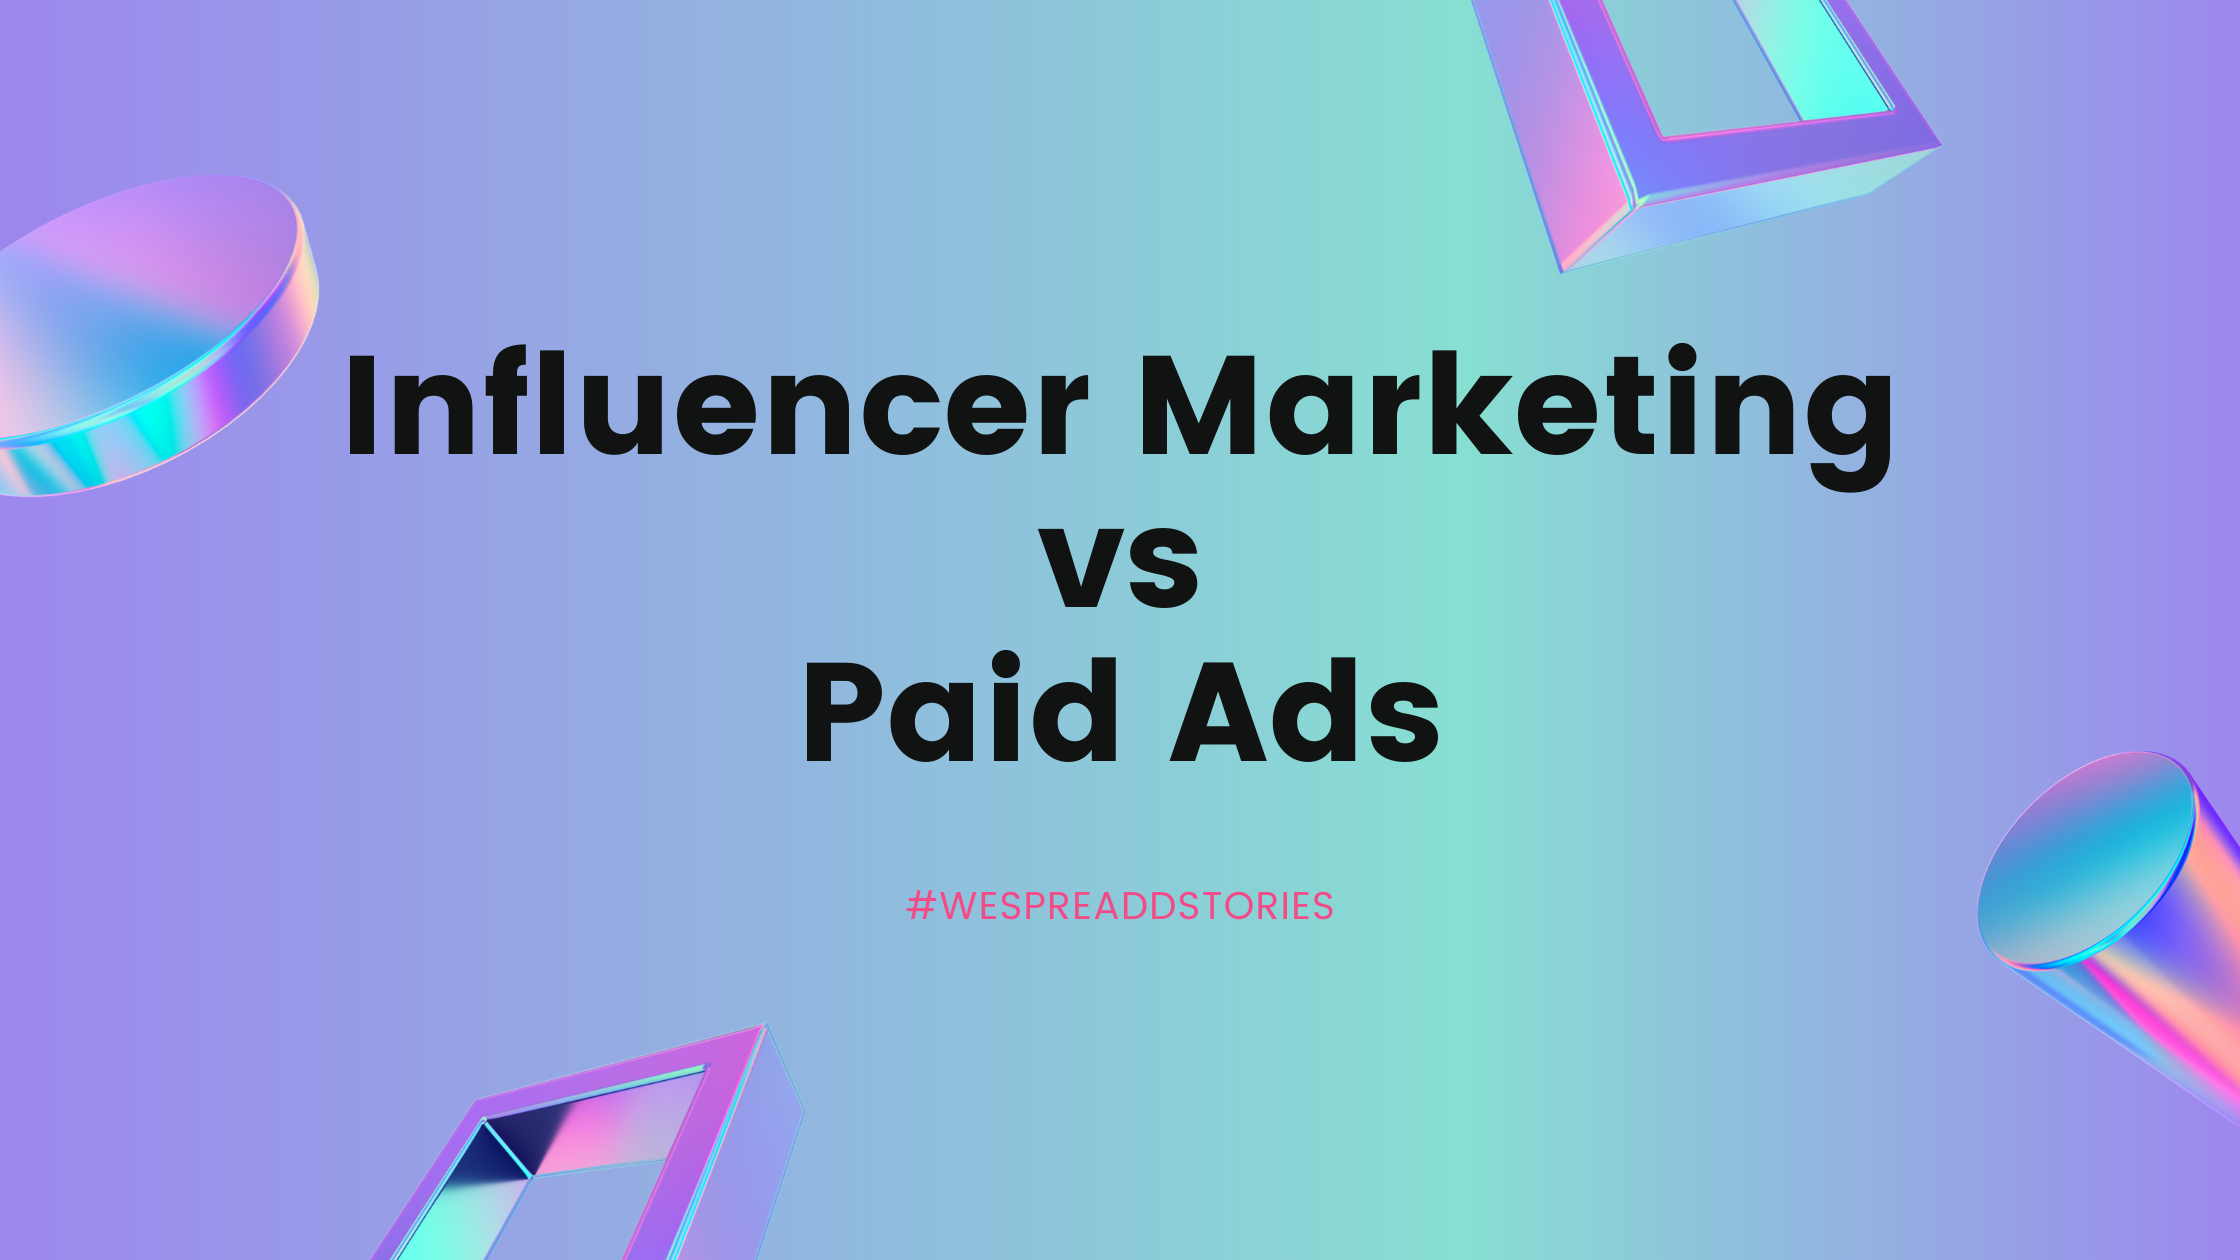 Influencer Marketing vs Paid Advertising: How do they differ from each other?